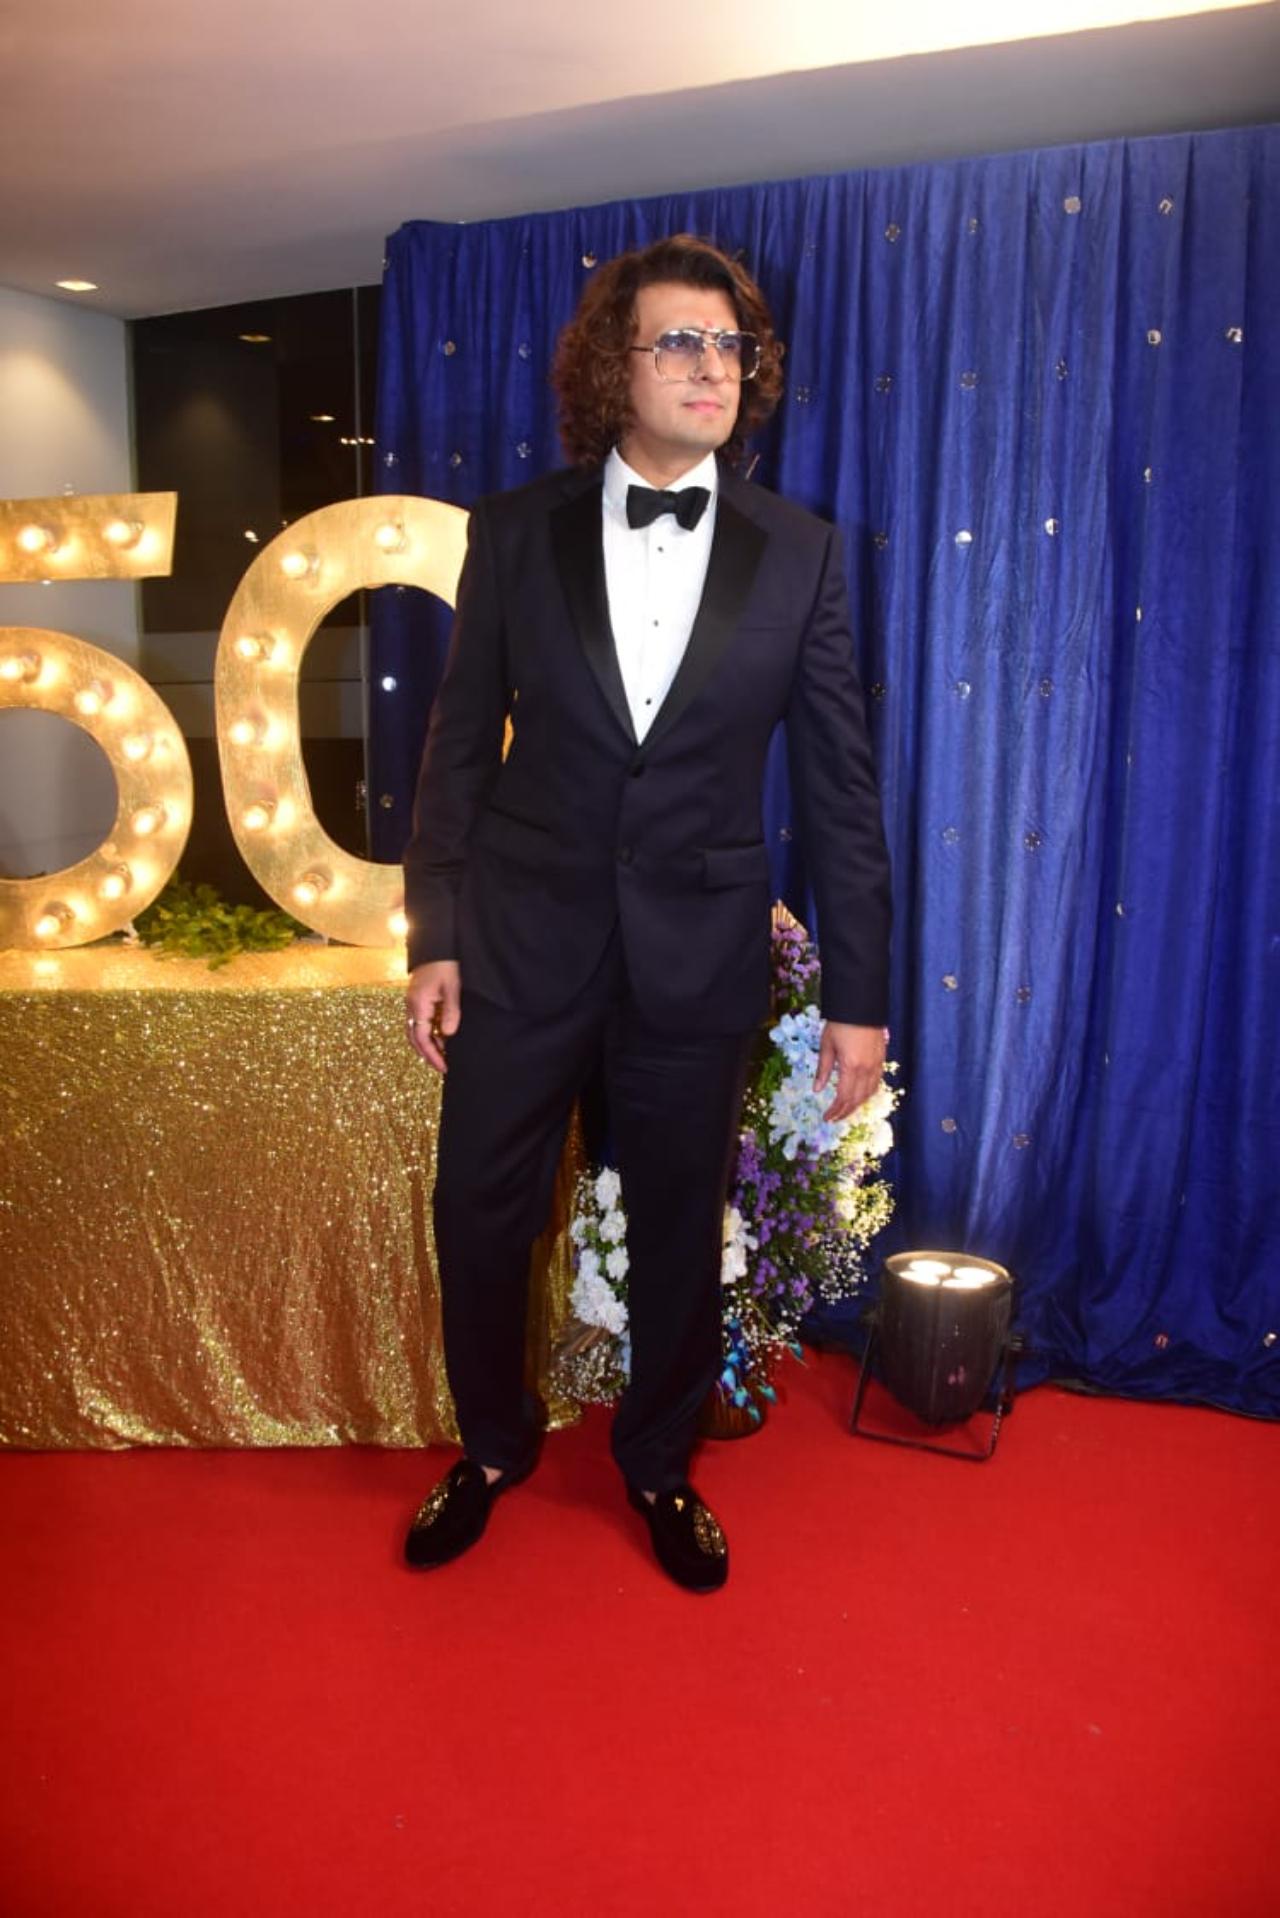 Sonu Nigam is celebrating his 50th birthday today on 30th July. The singer hosted a splendid birthday bash last night